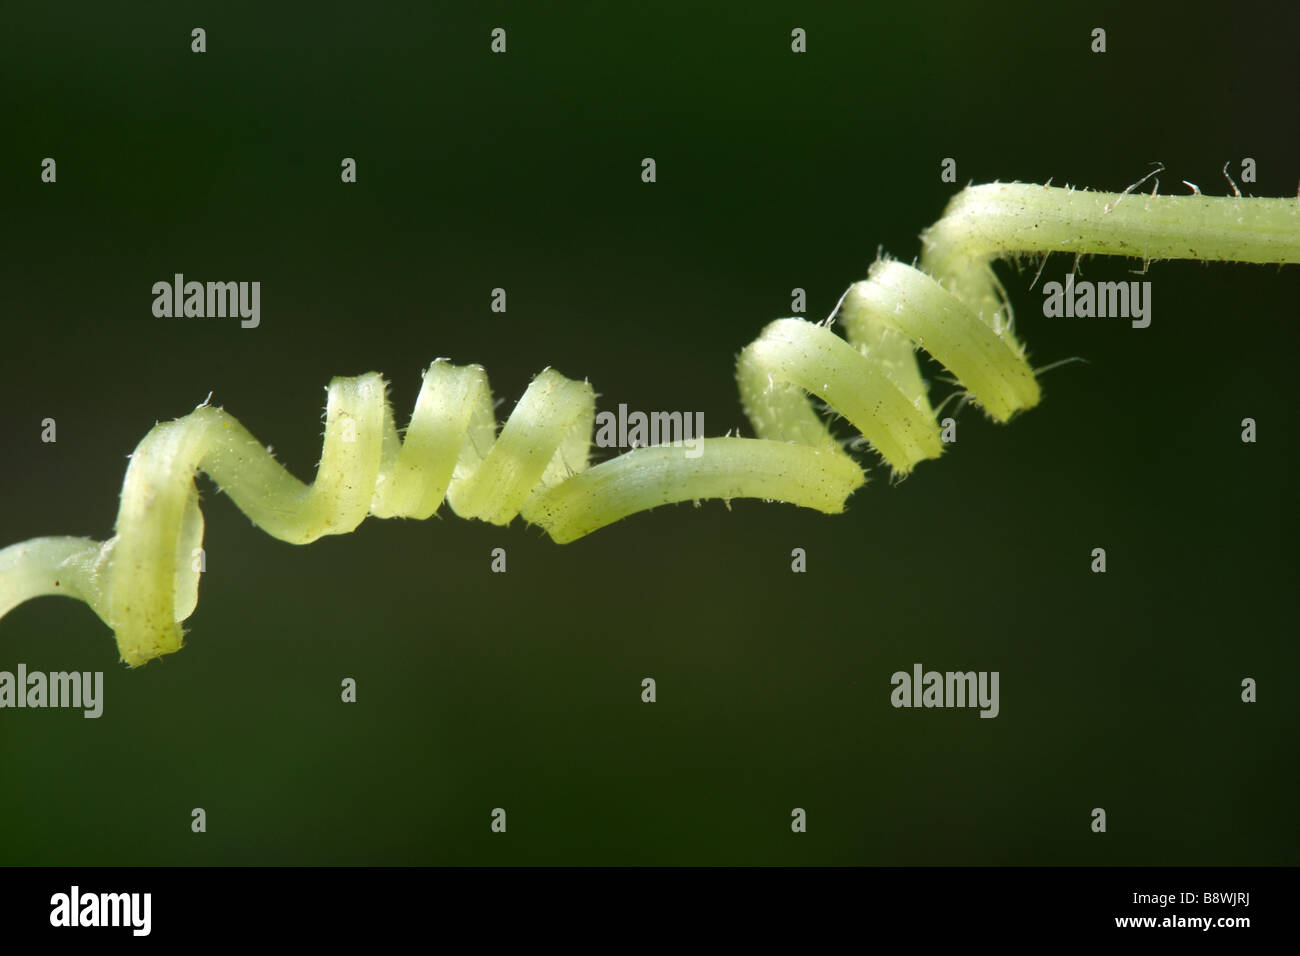 A tendril from a Zucchini vine Stock Photo